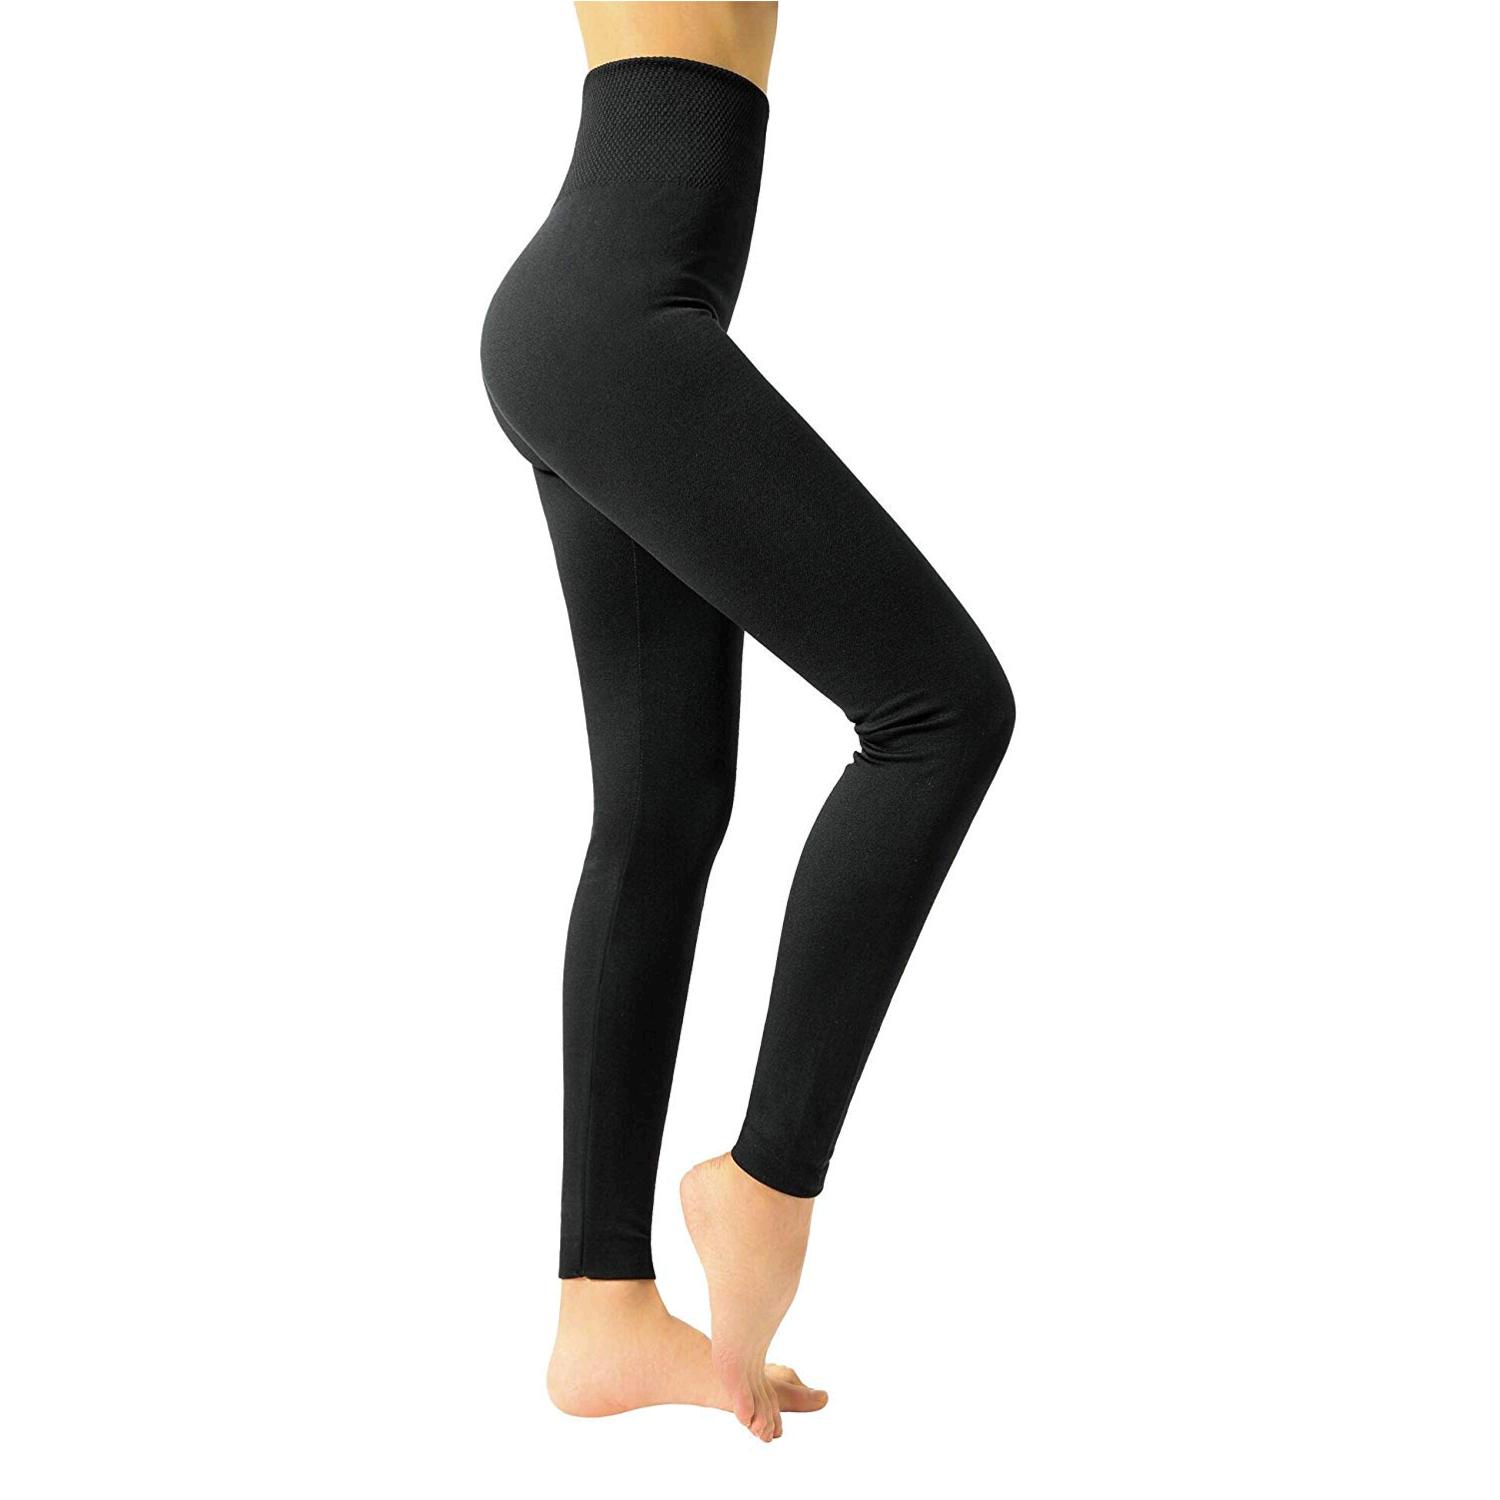 The Warmest Winter Leggings, According to Fitness Enthusiasts